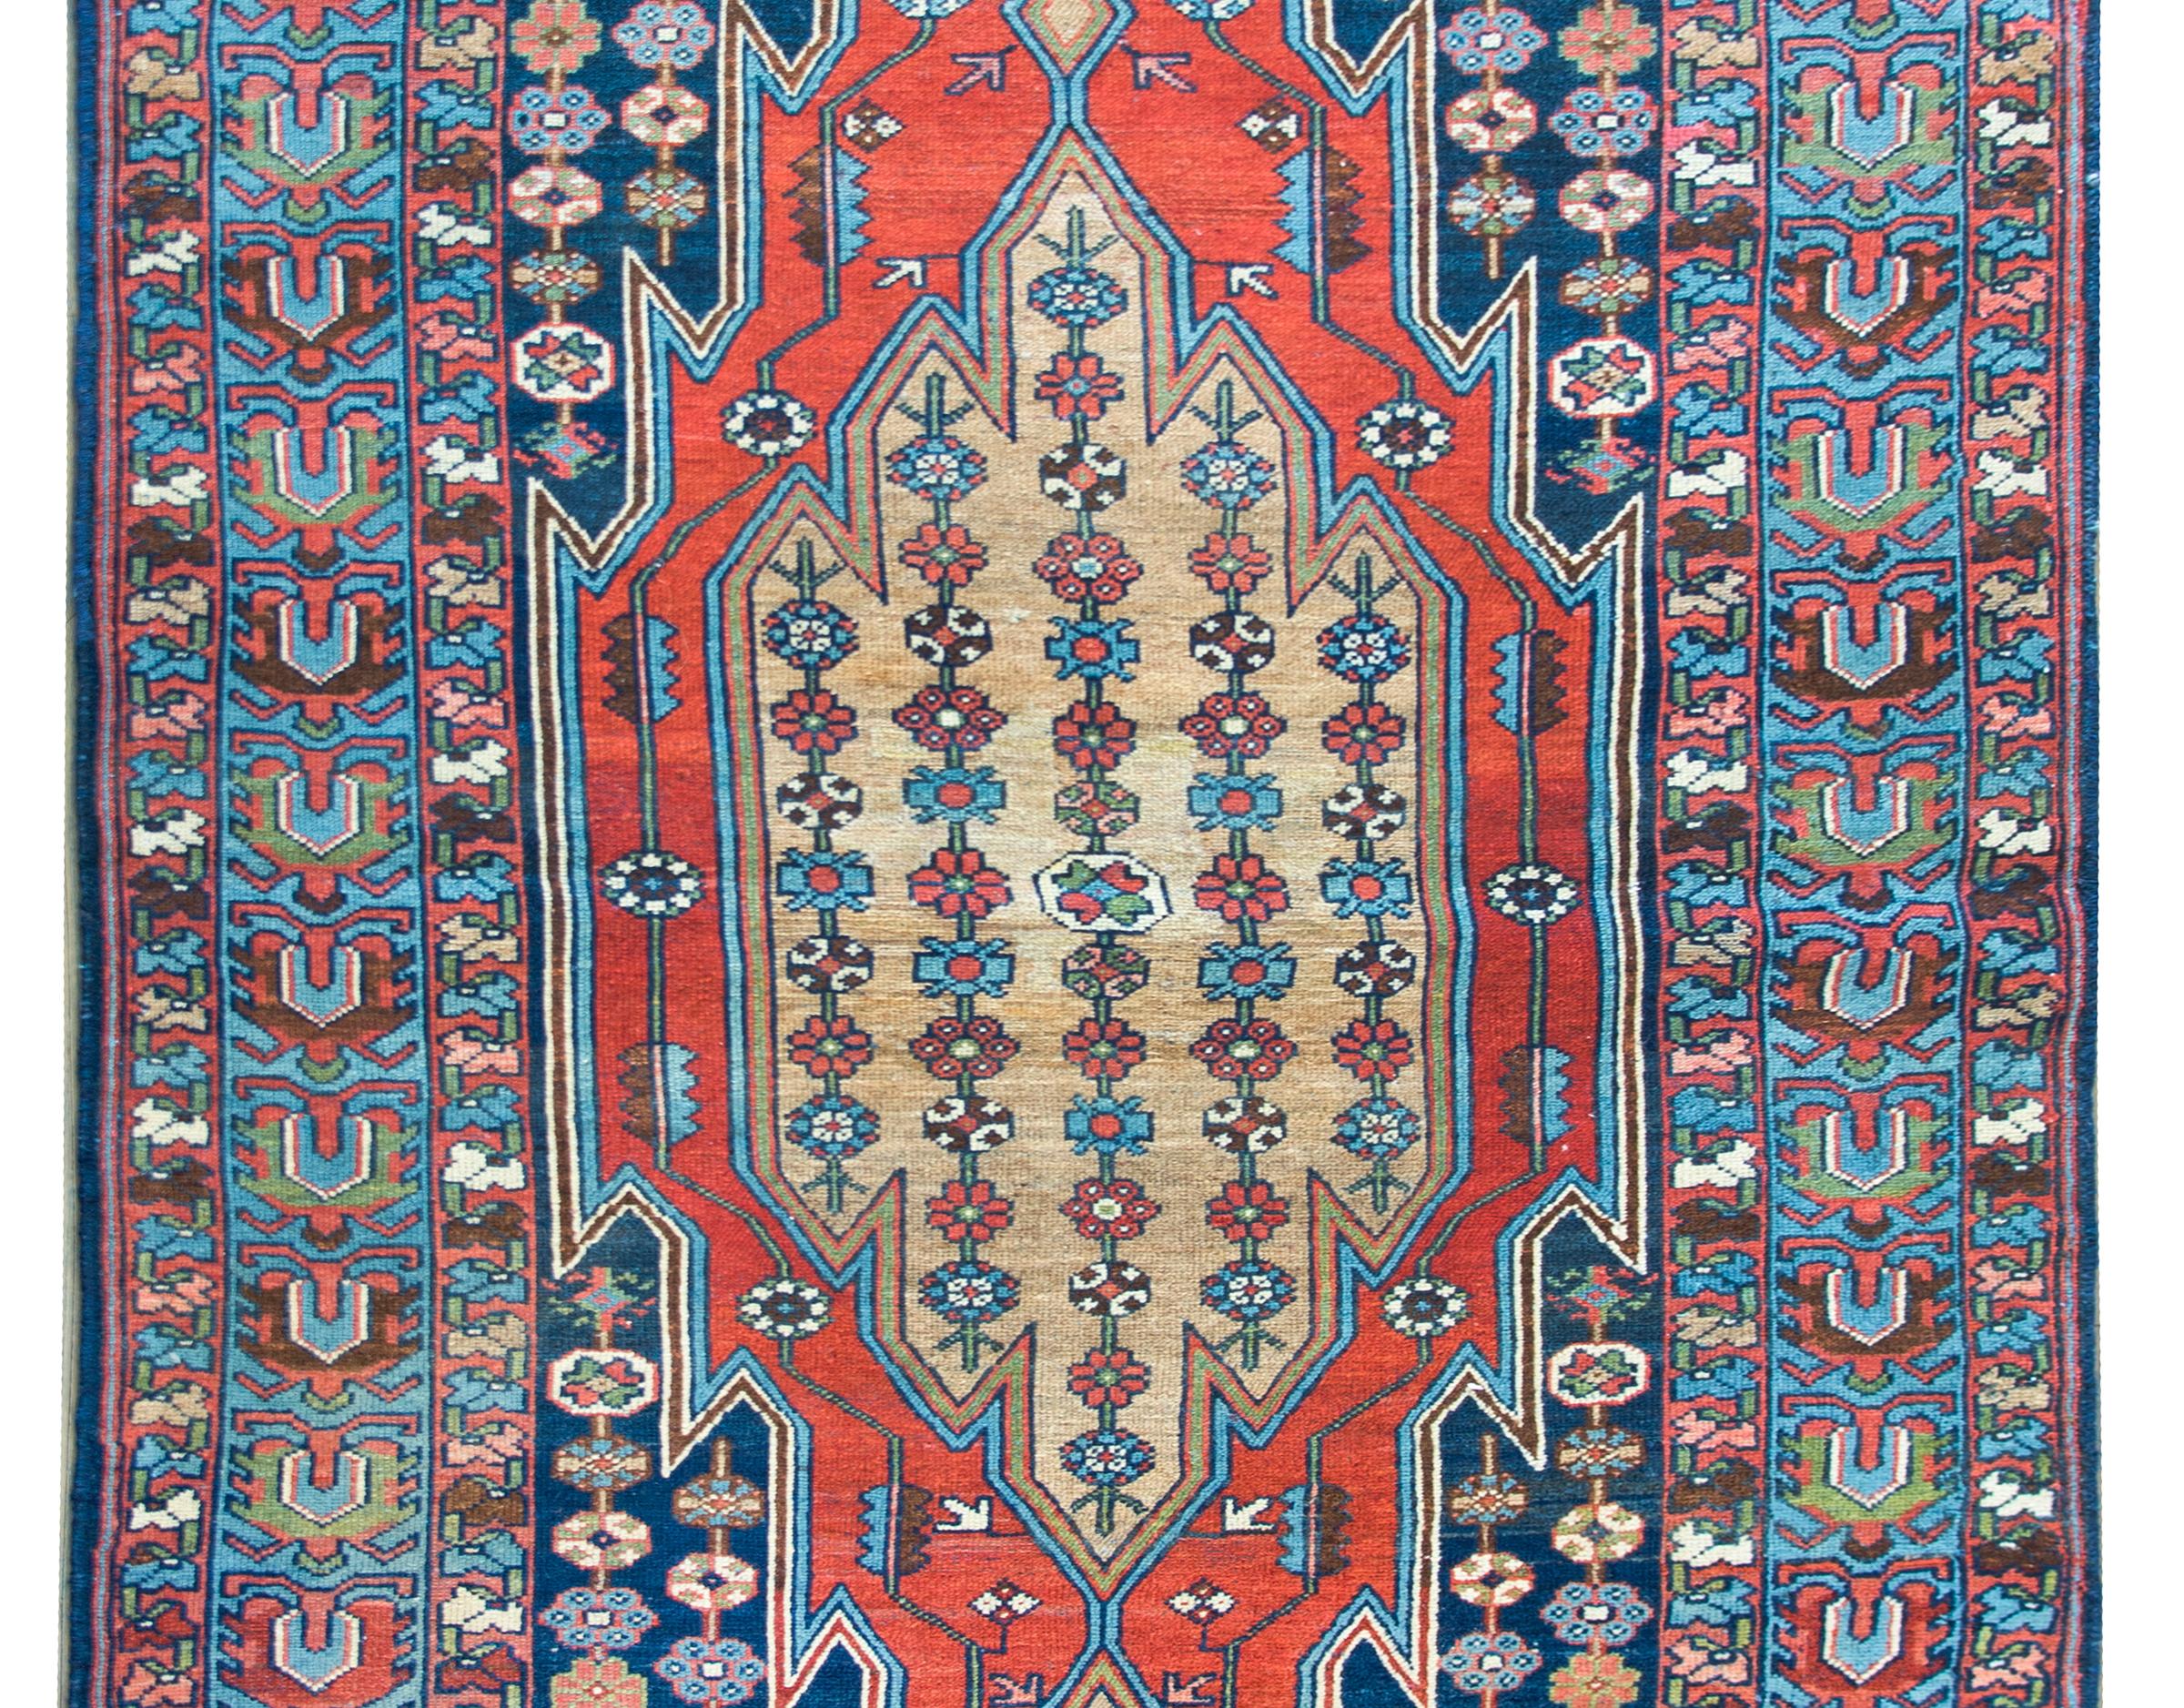 A beautiful early 20th century Persian Mazleghan rug with a large central medallion with flowers arranged in stripes, living amidst a field of even more flower, and surrounded by a wide border with a wide central stripe with stylized flowers flanked